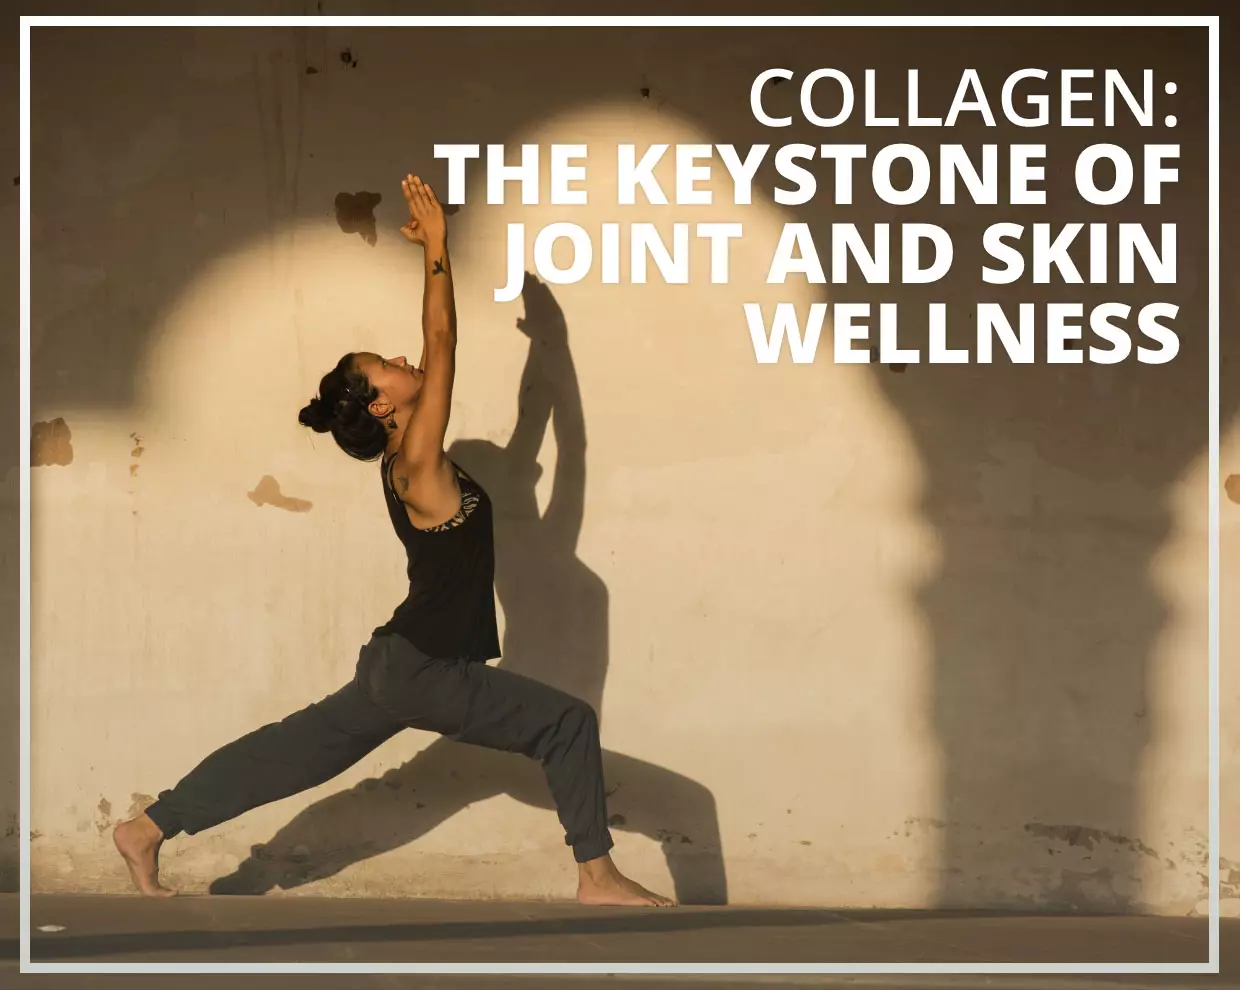 Collagen: The Keystone of Joint and Skin Wellness